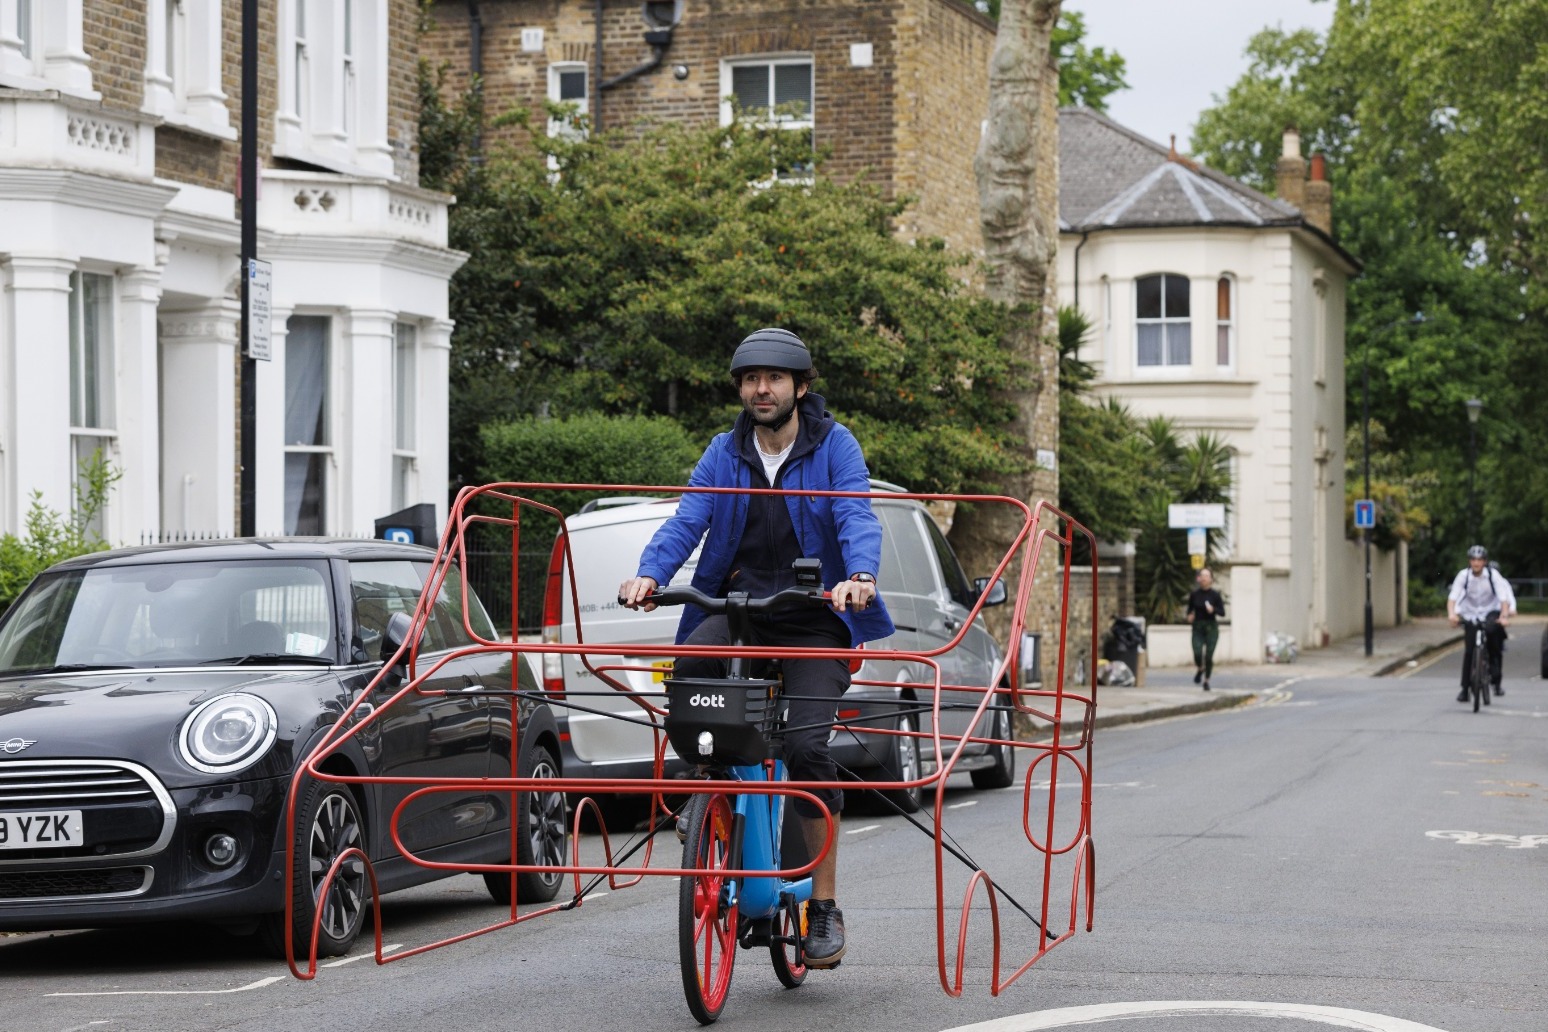 Cyclists wear car frames to show ‘absurdity’ of vehicles hogging roads 